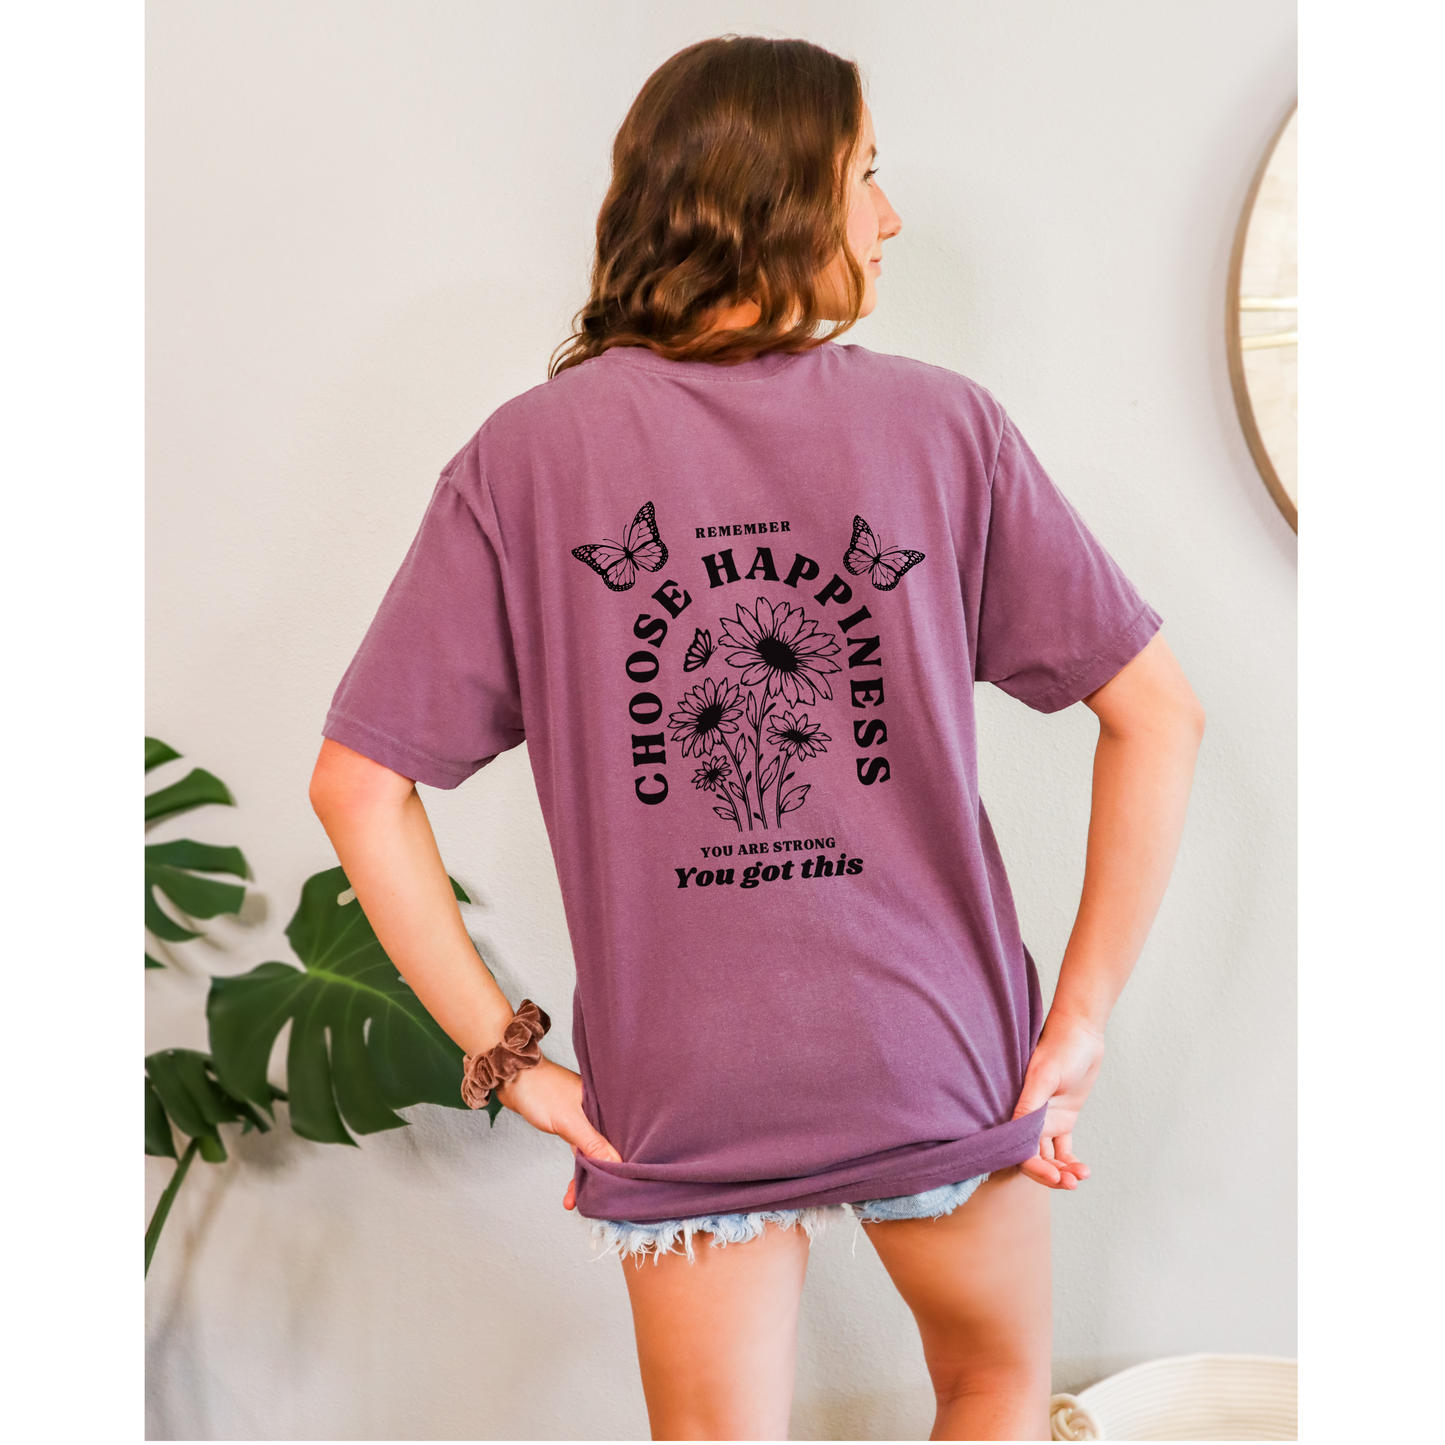 Butterfly,. Choose Happiness Front and Back. Oversized Tee. 100% Cotton. Unisex sizing.